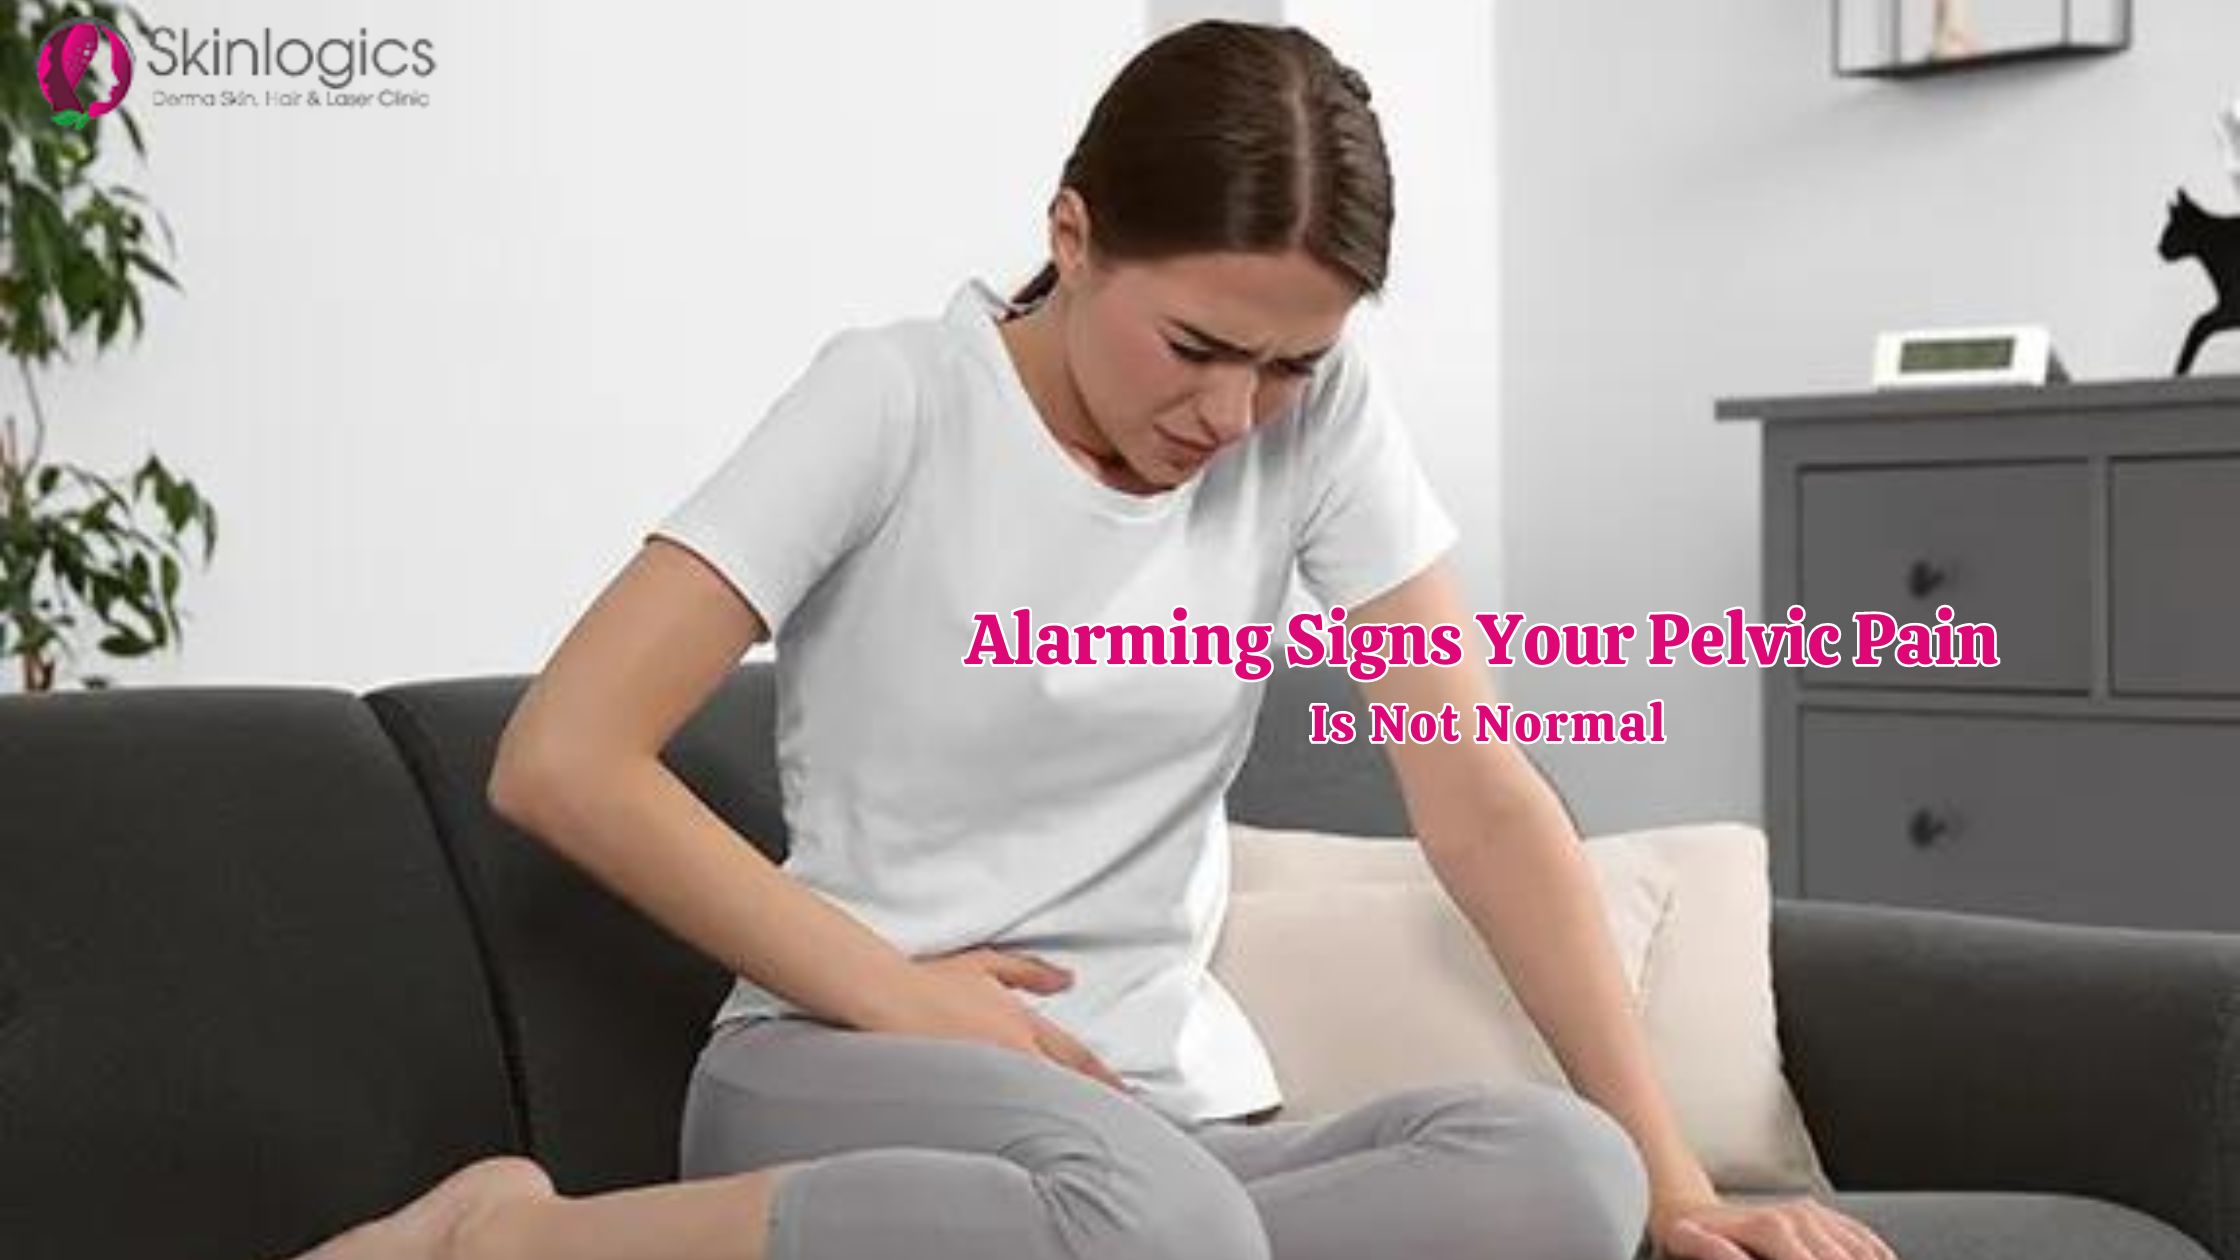 Alarming Signs Your Pelvic Pain Is Not Normal